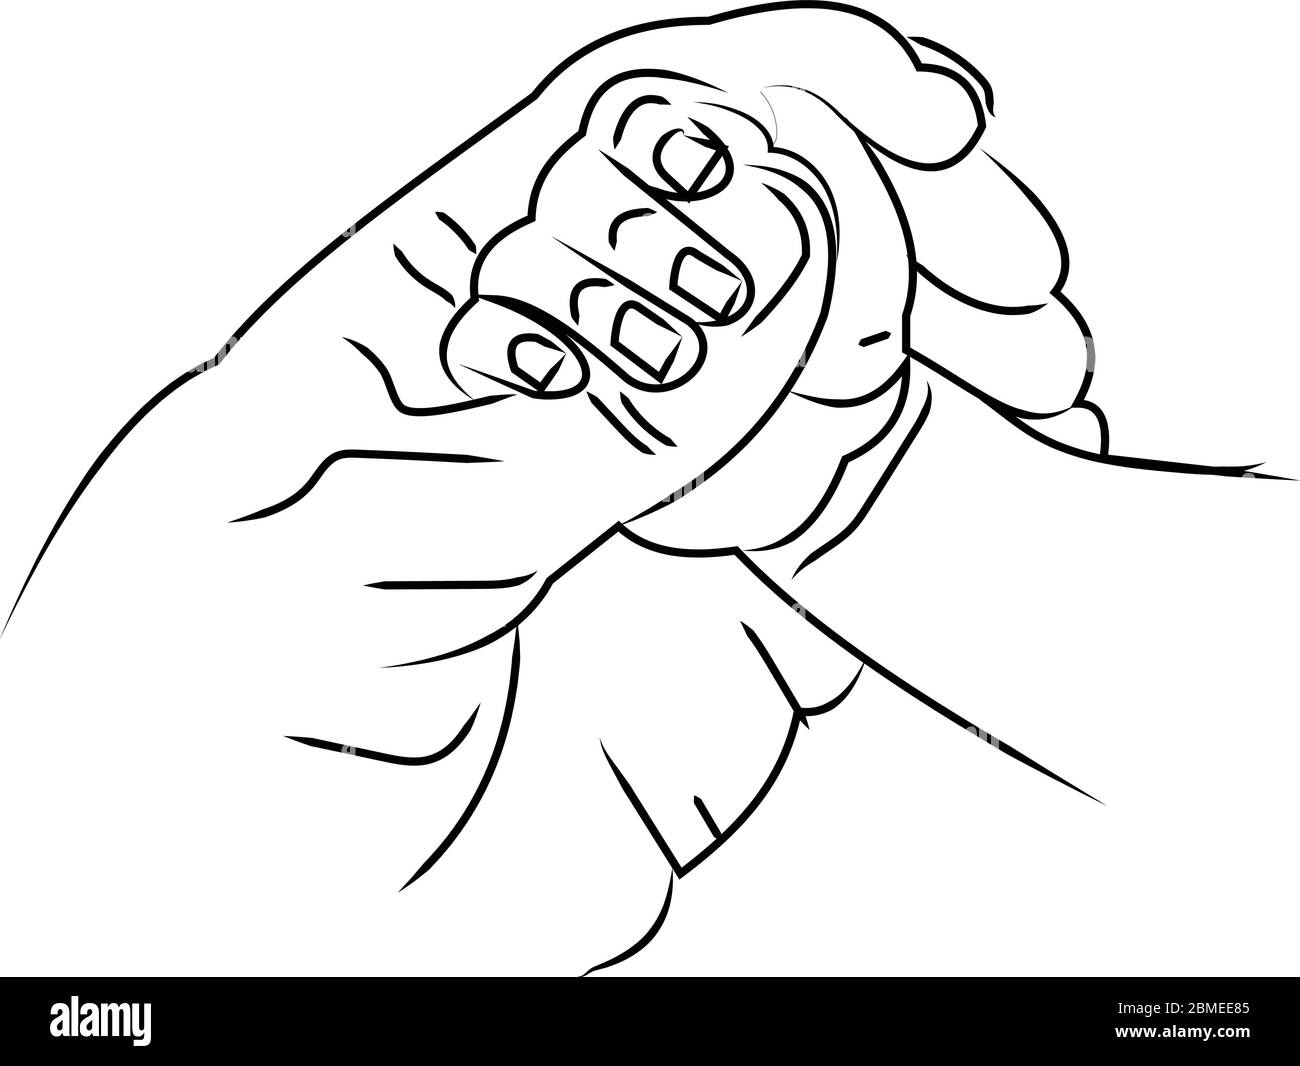 Holding our hand Stock Vector Images - Alamy